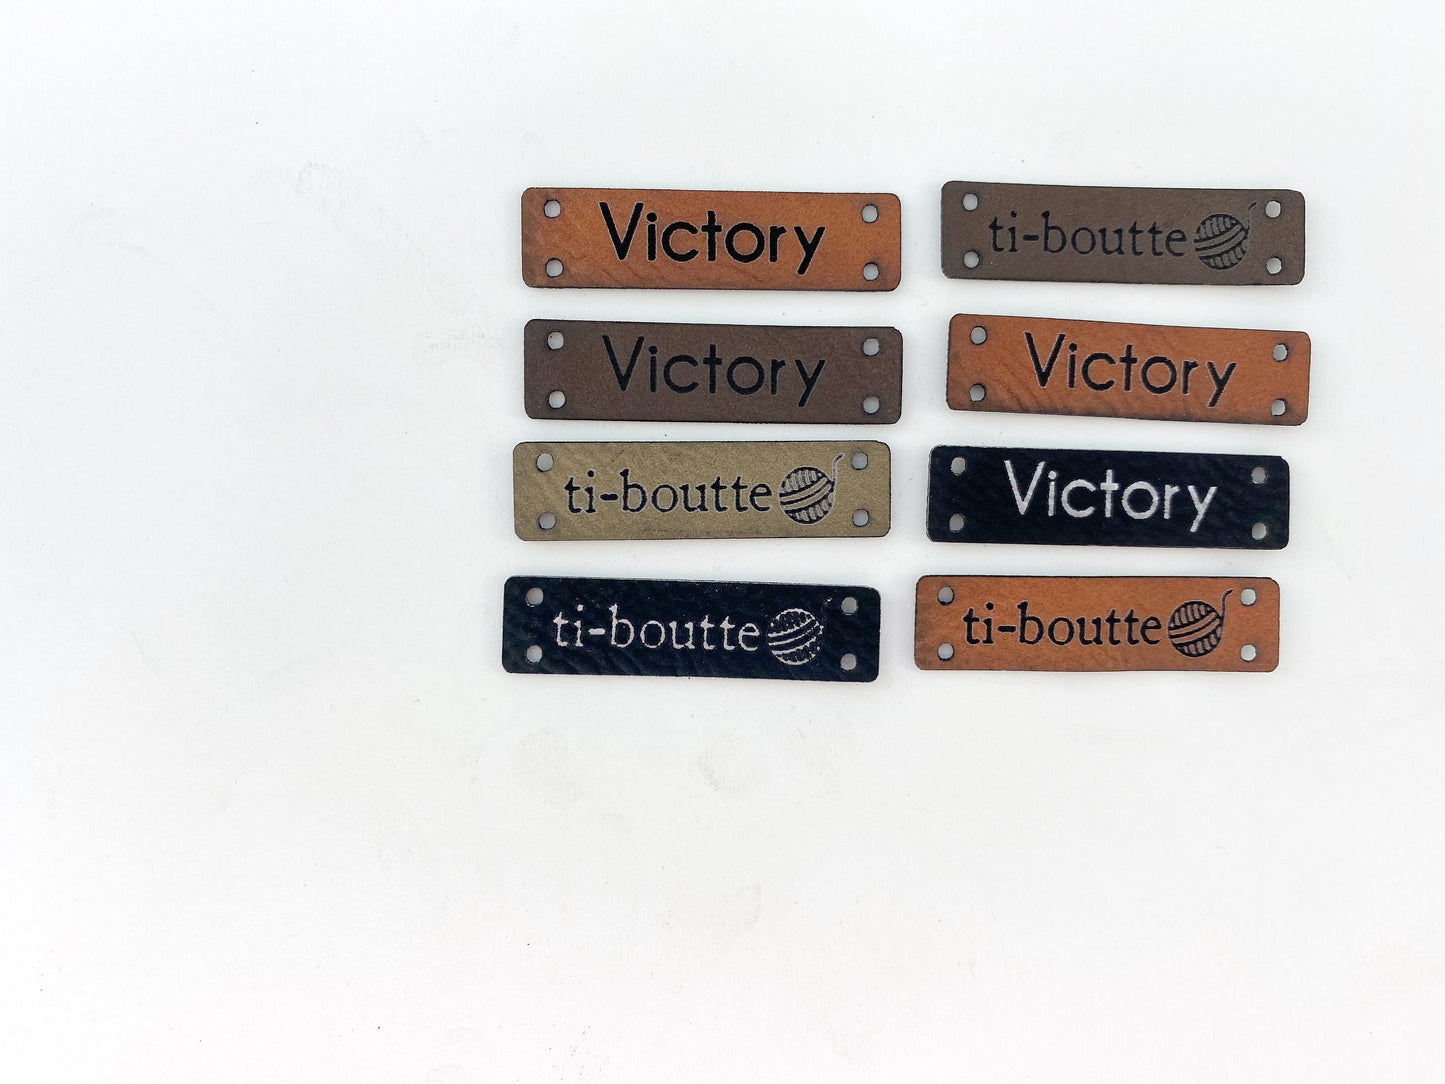 Faux Leather Knitting Tags - Small Bars